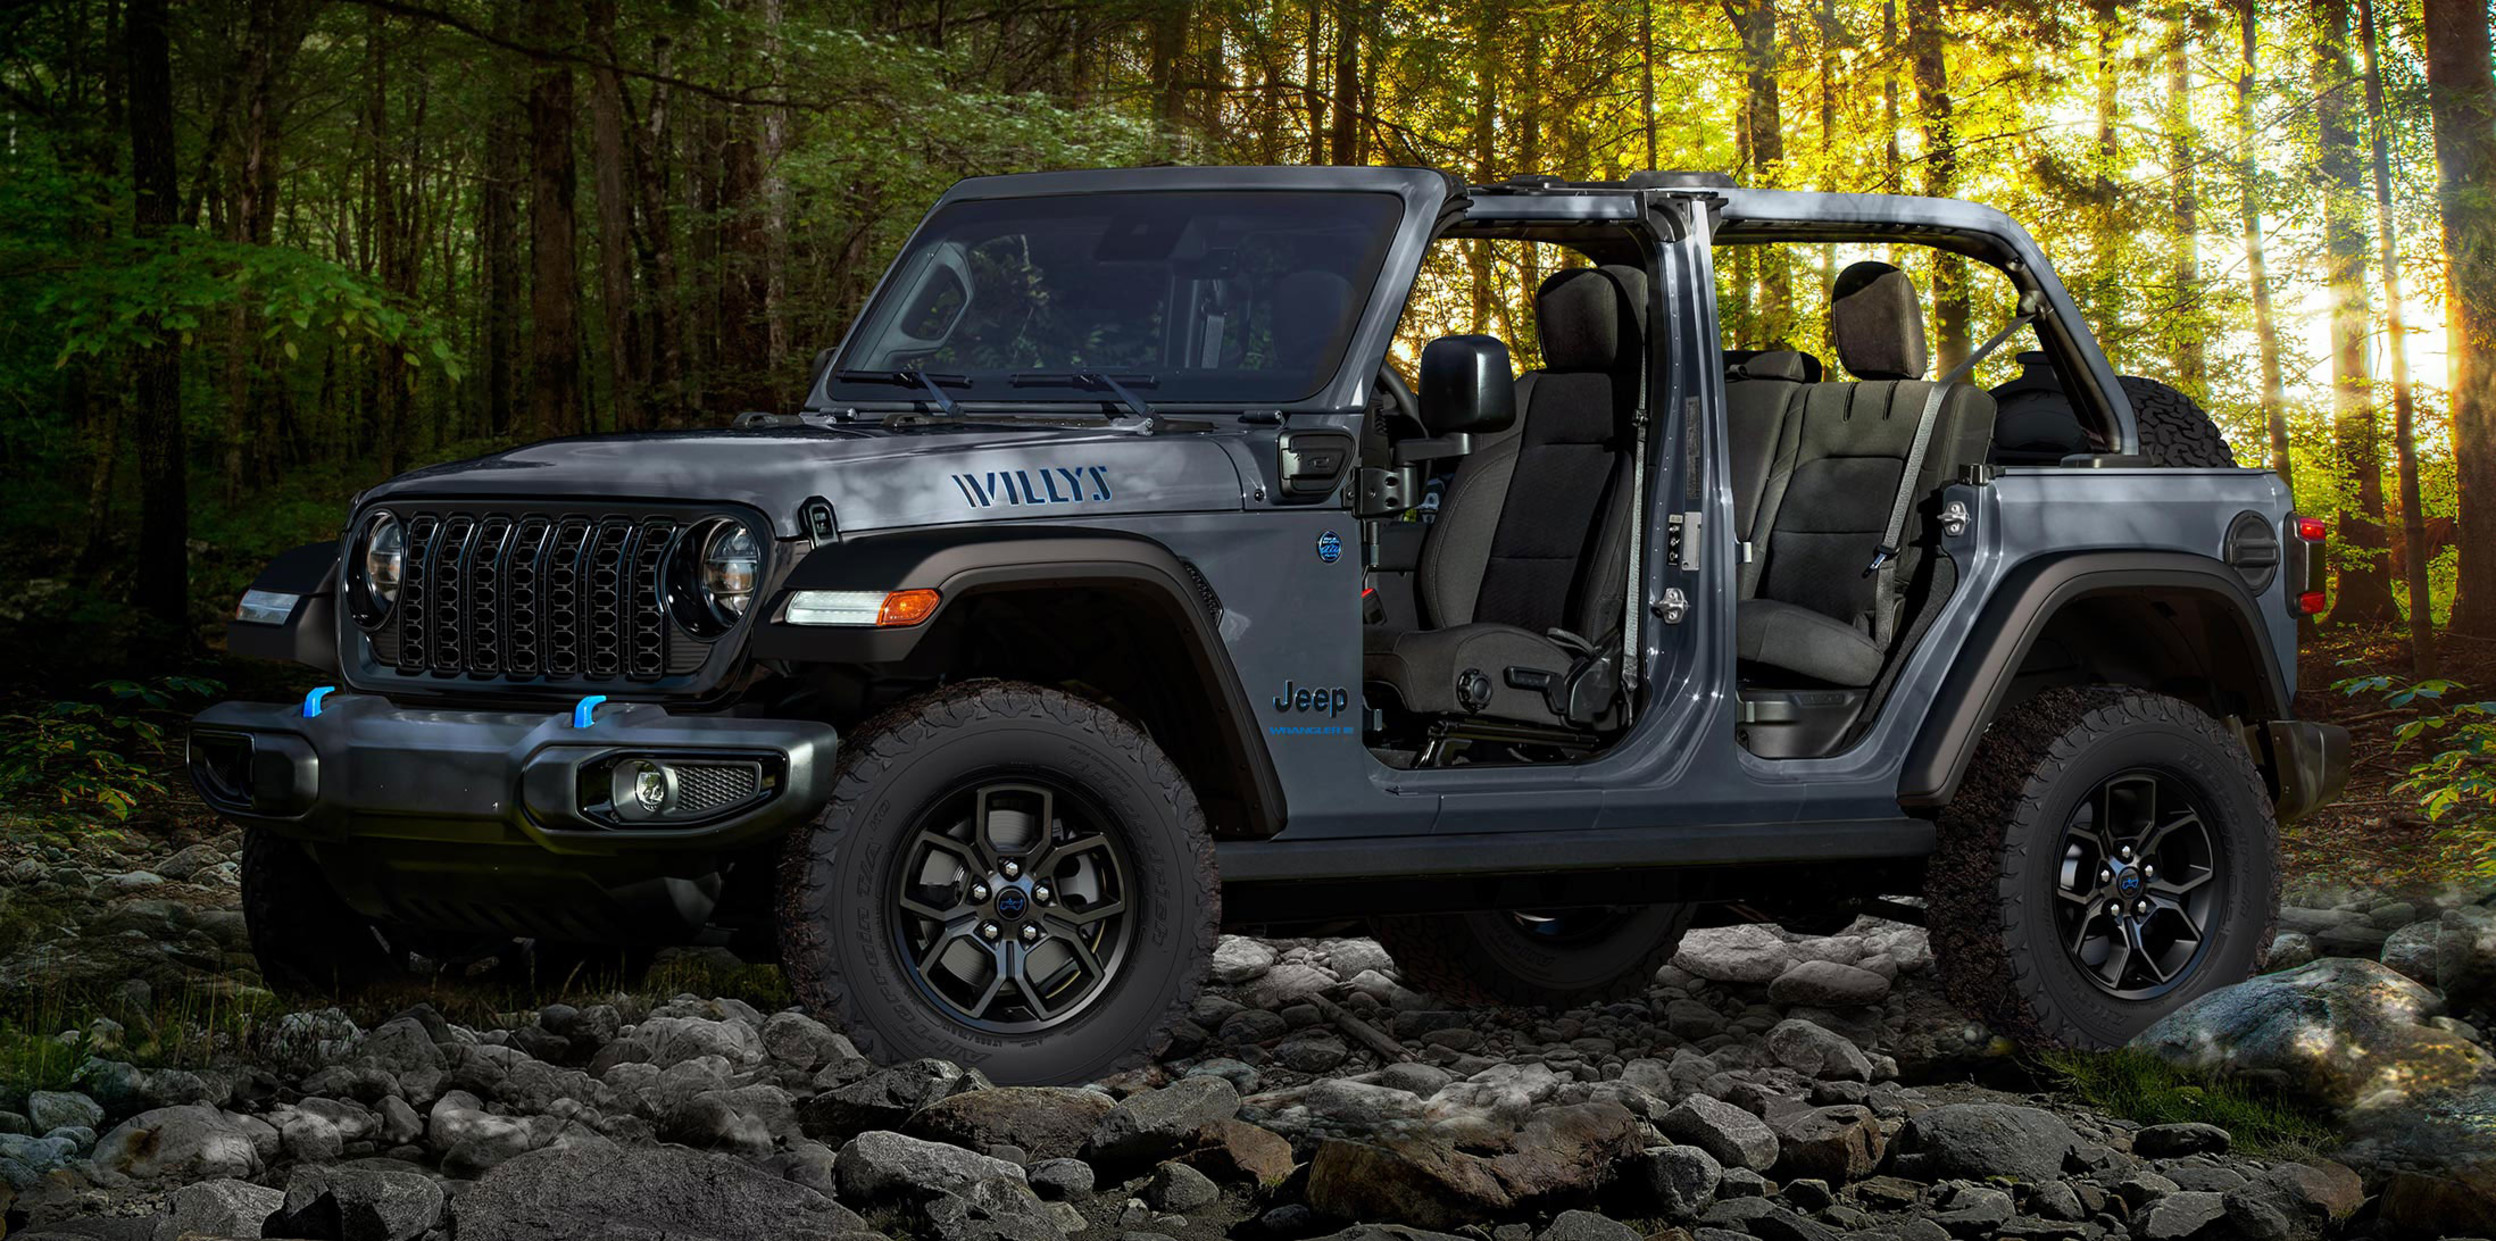 Car Review: Jeep Wrangler Unlimited Sahara 4xe has electric-only